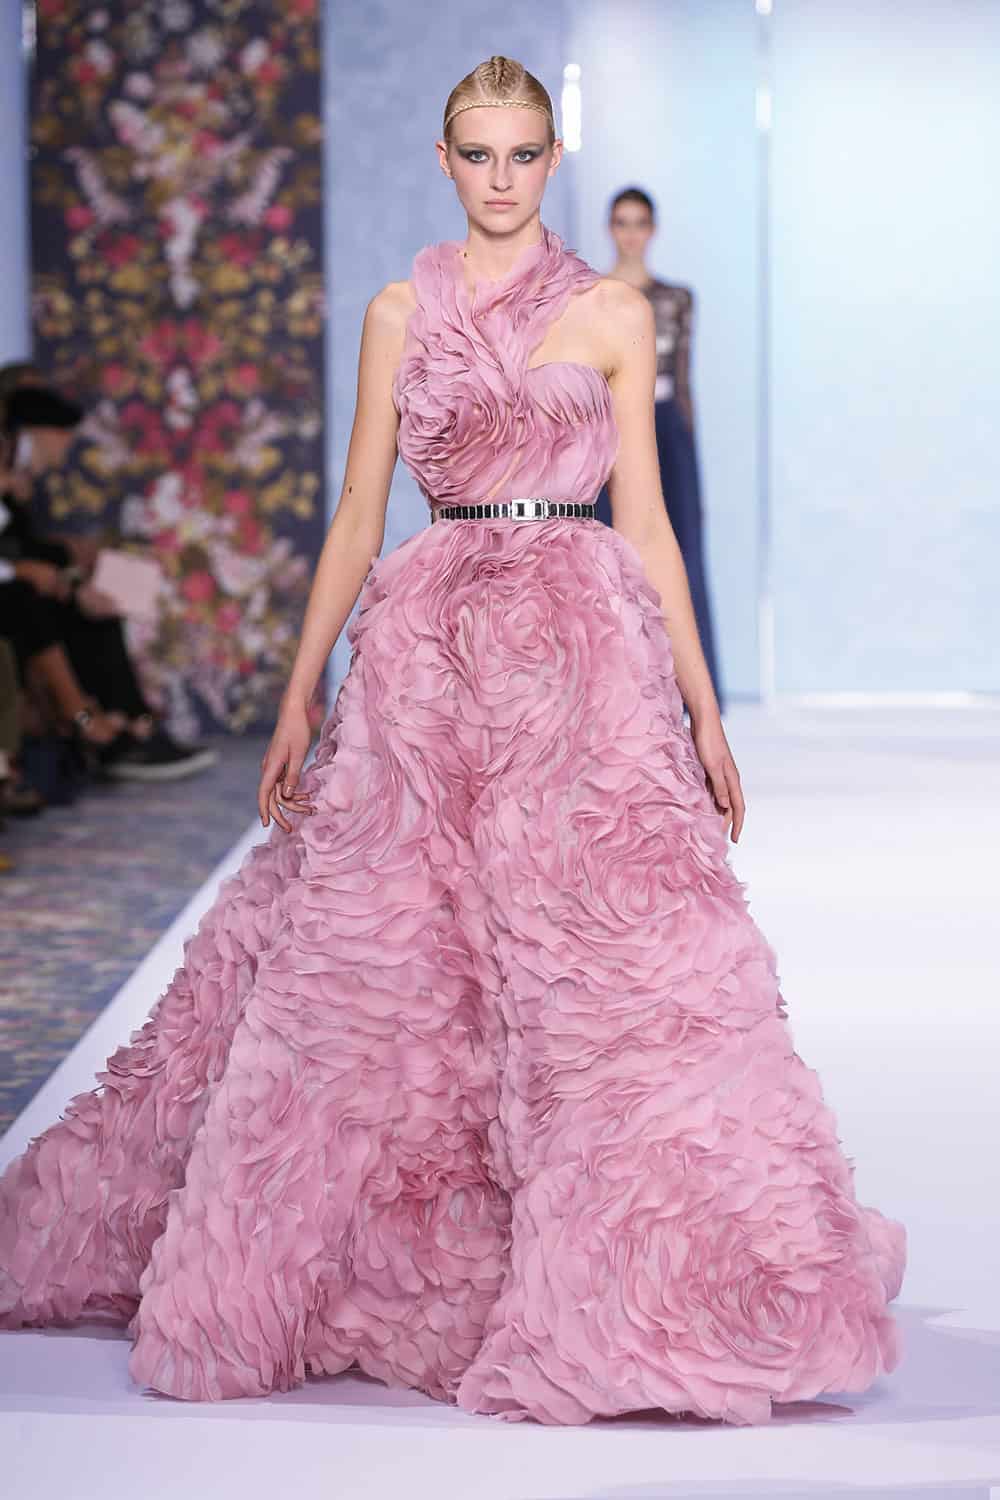 Pink wedding dresses: Pink floral wedding gown from Ralph & Russo